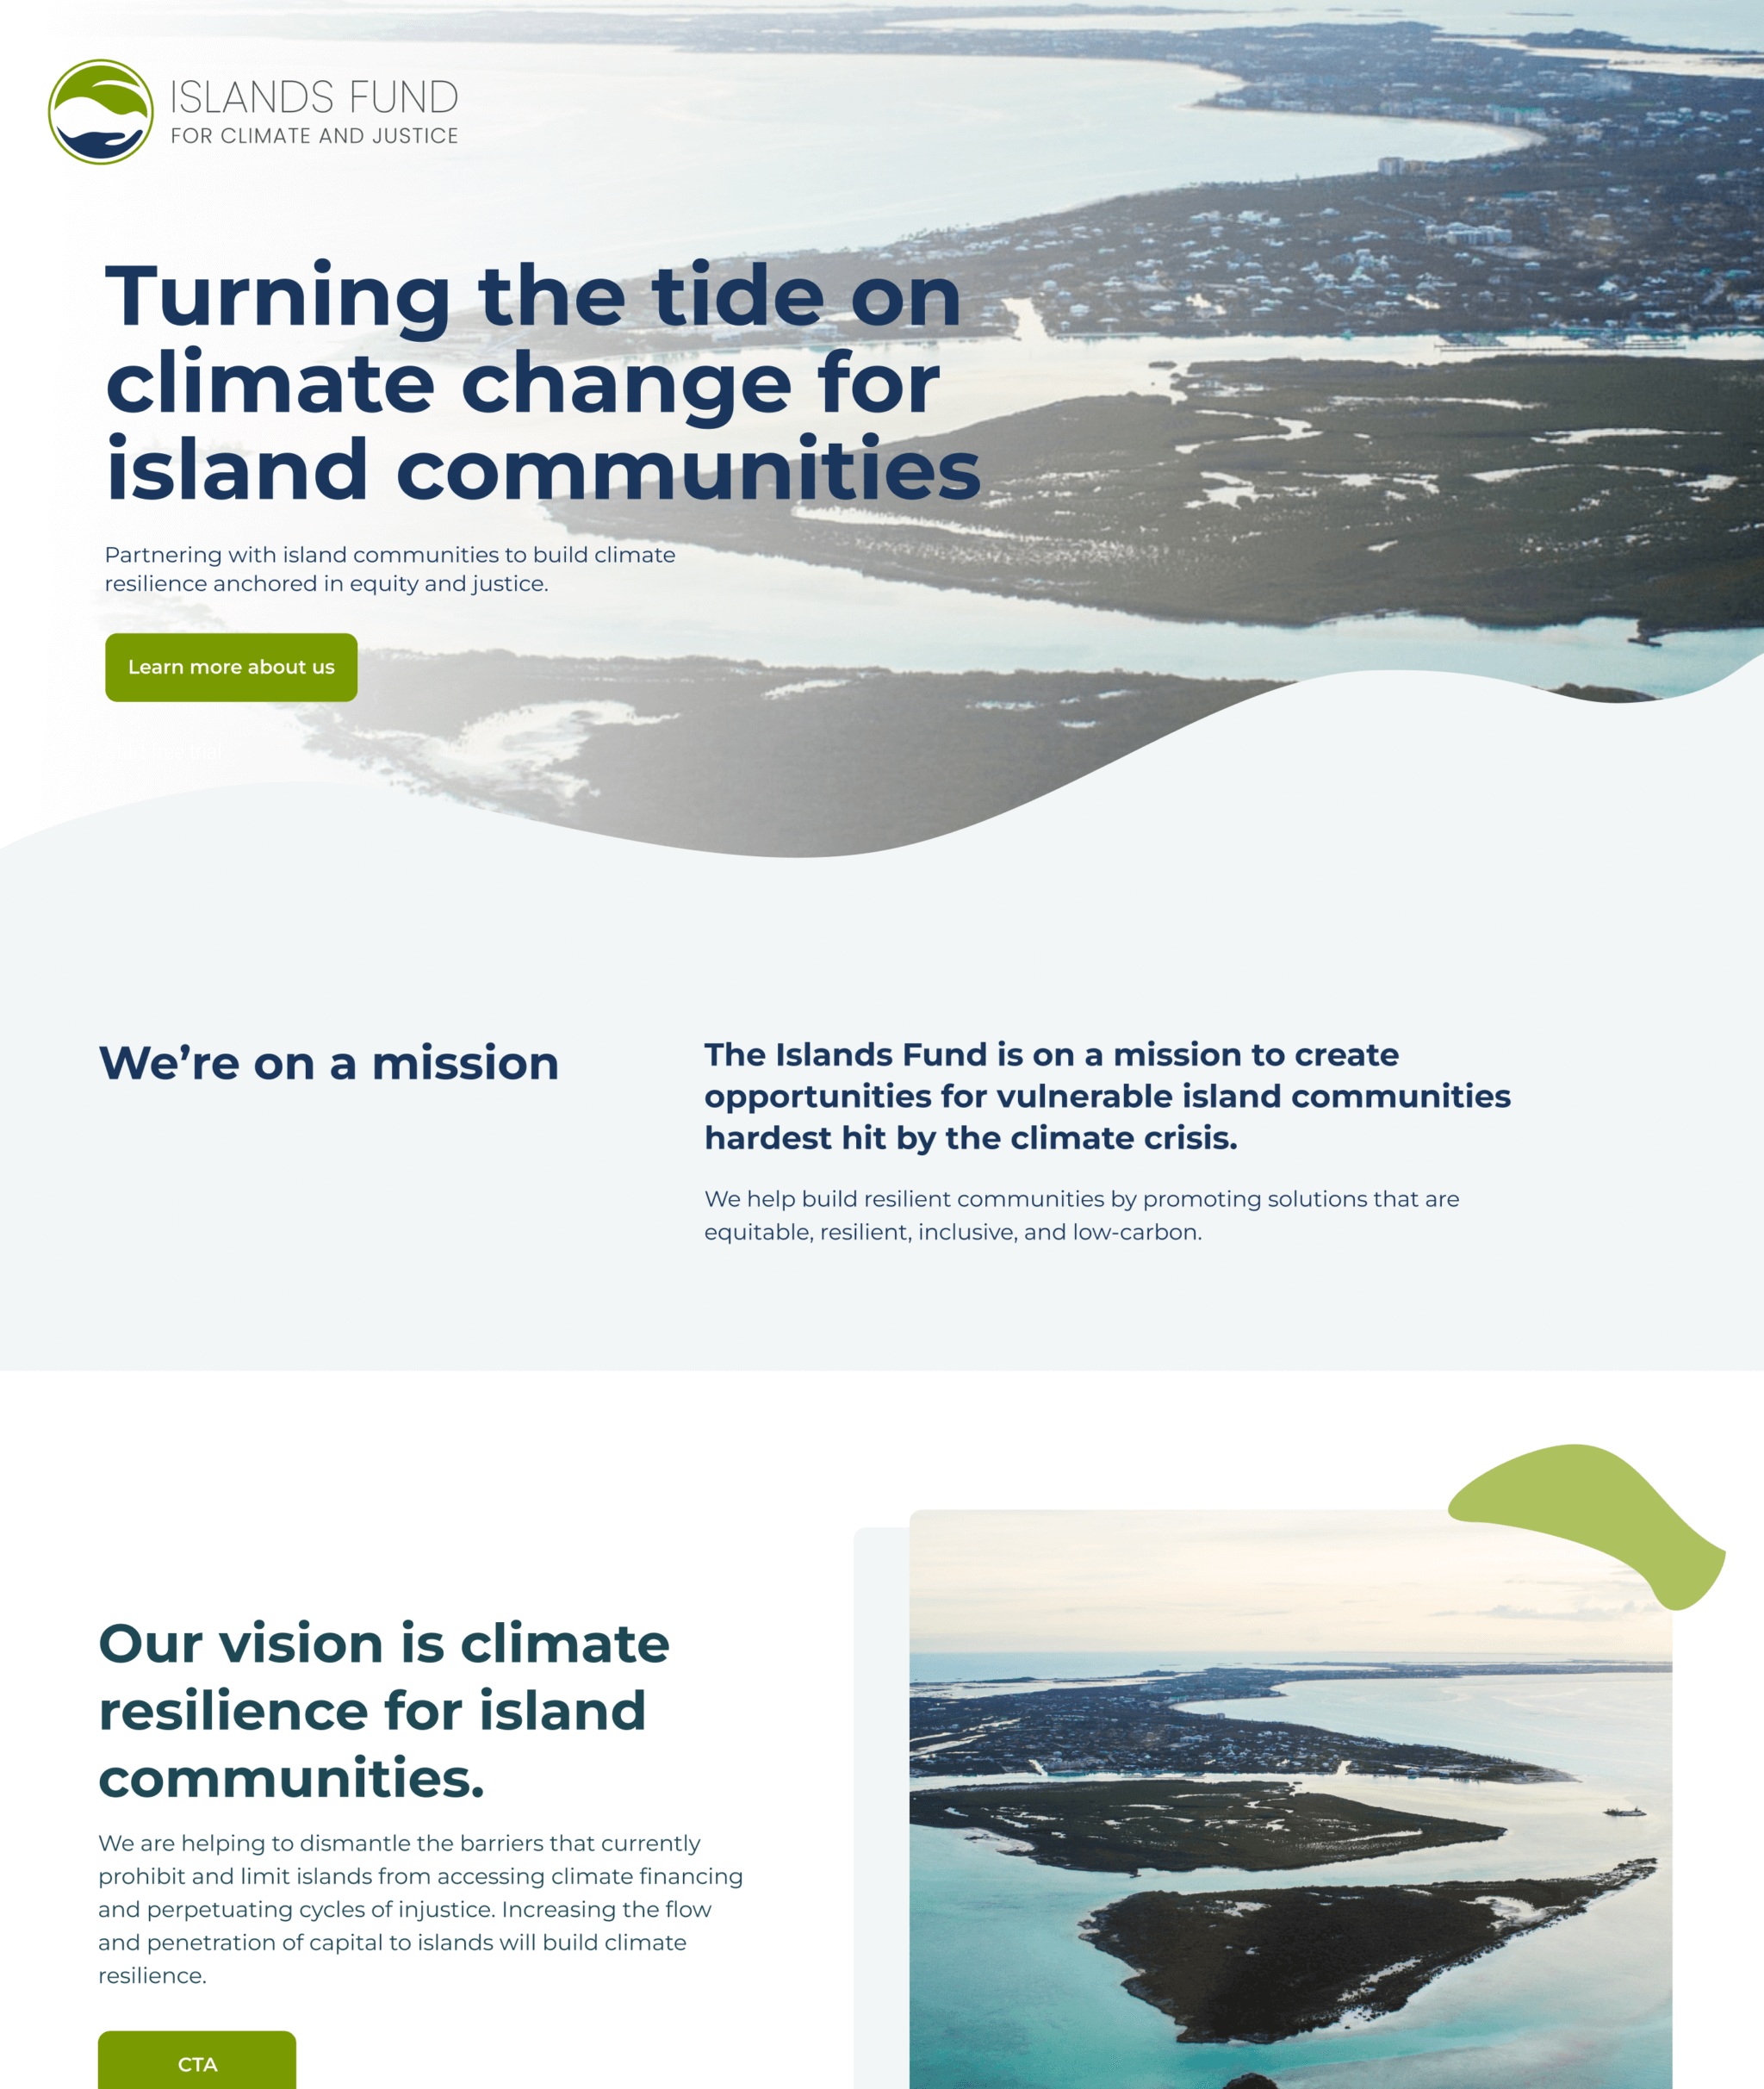 A homepage screenshot of The Islands Fund for Climate and Justice. The feel of the design is wide open and clean.